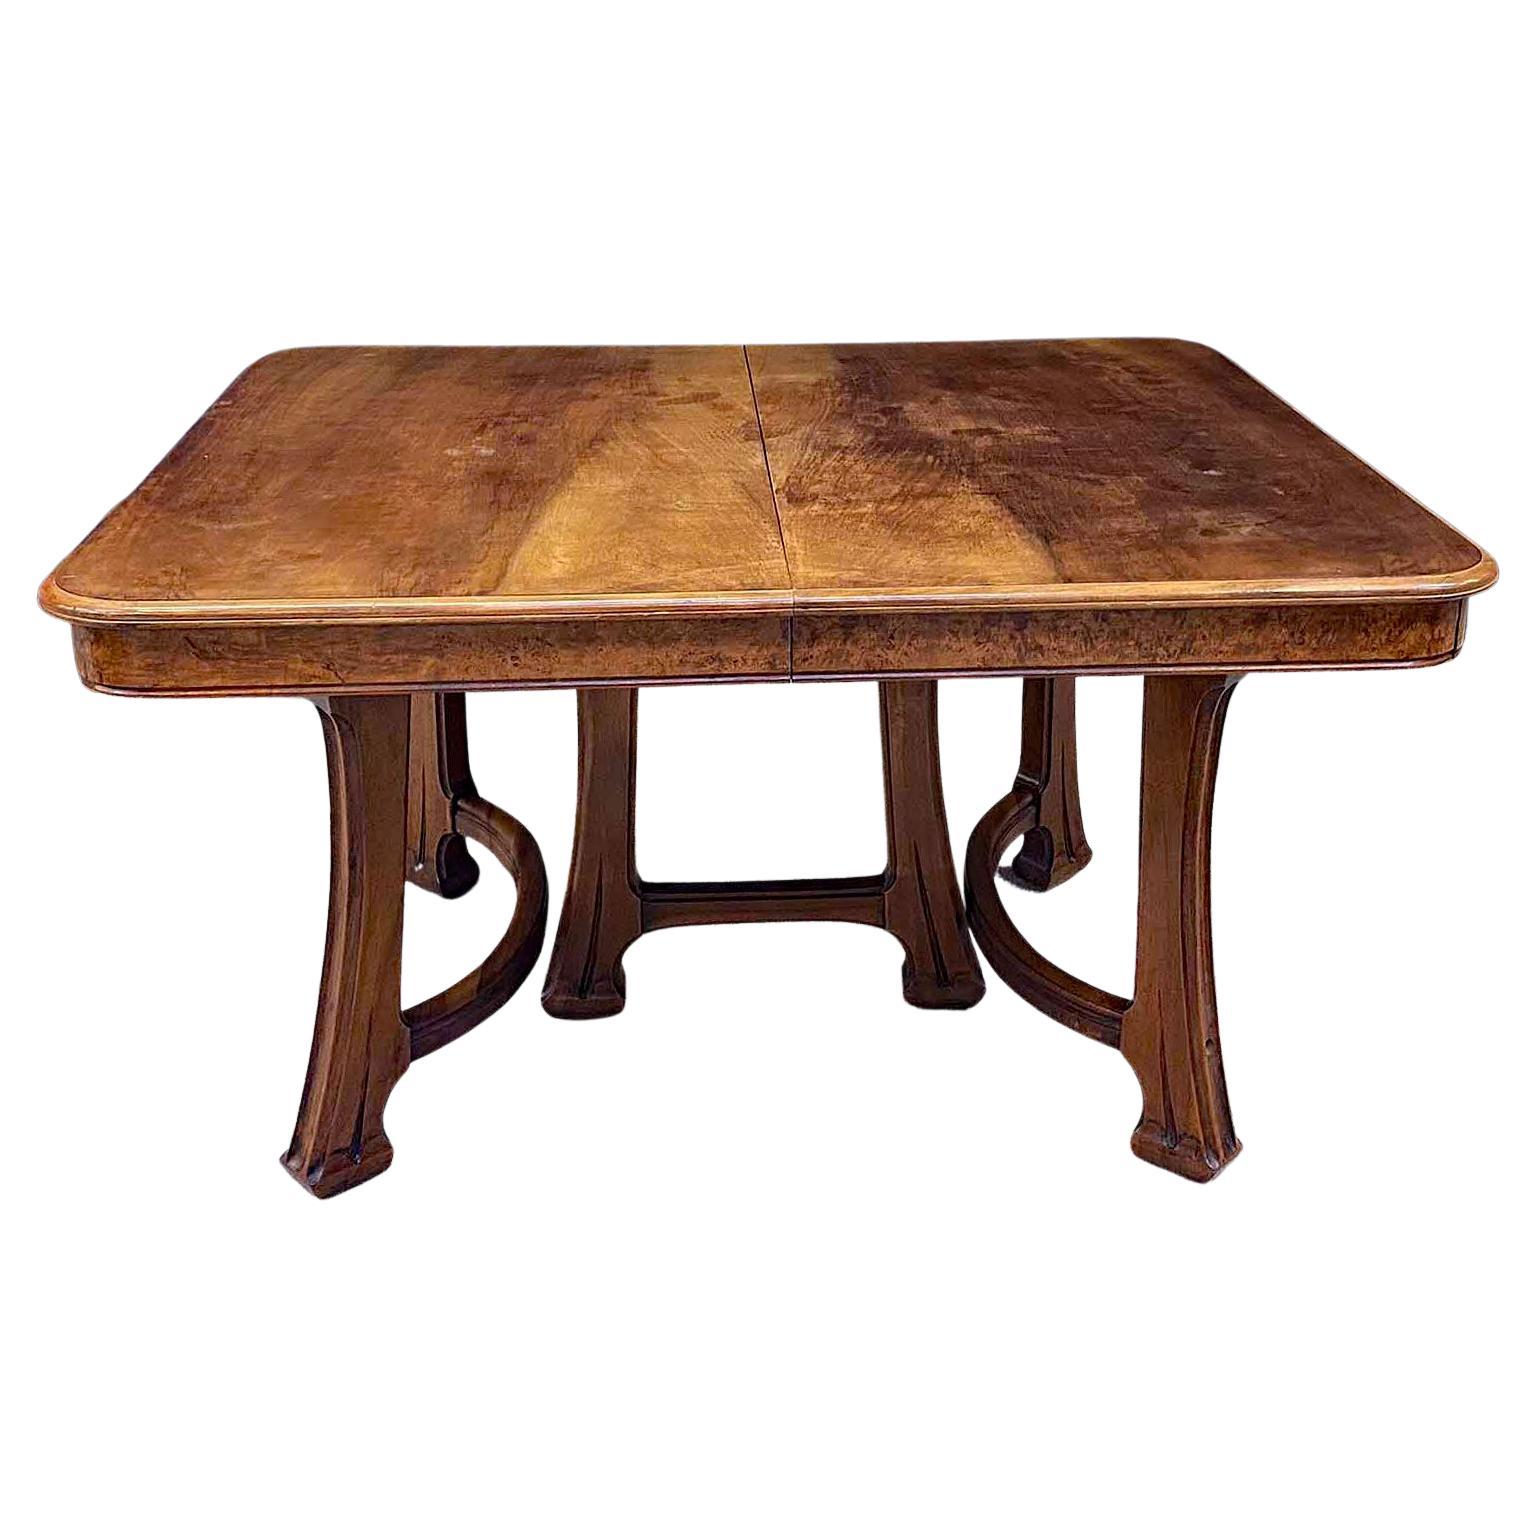 Attributed to Gauthier-Poinsignon & Cie, Art Nouveau Dining Room Table in Walnut